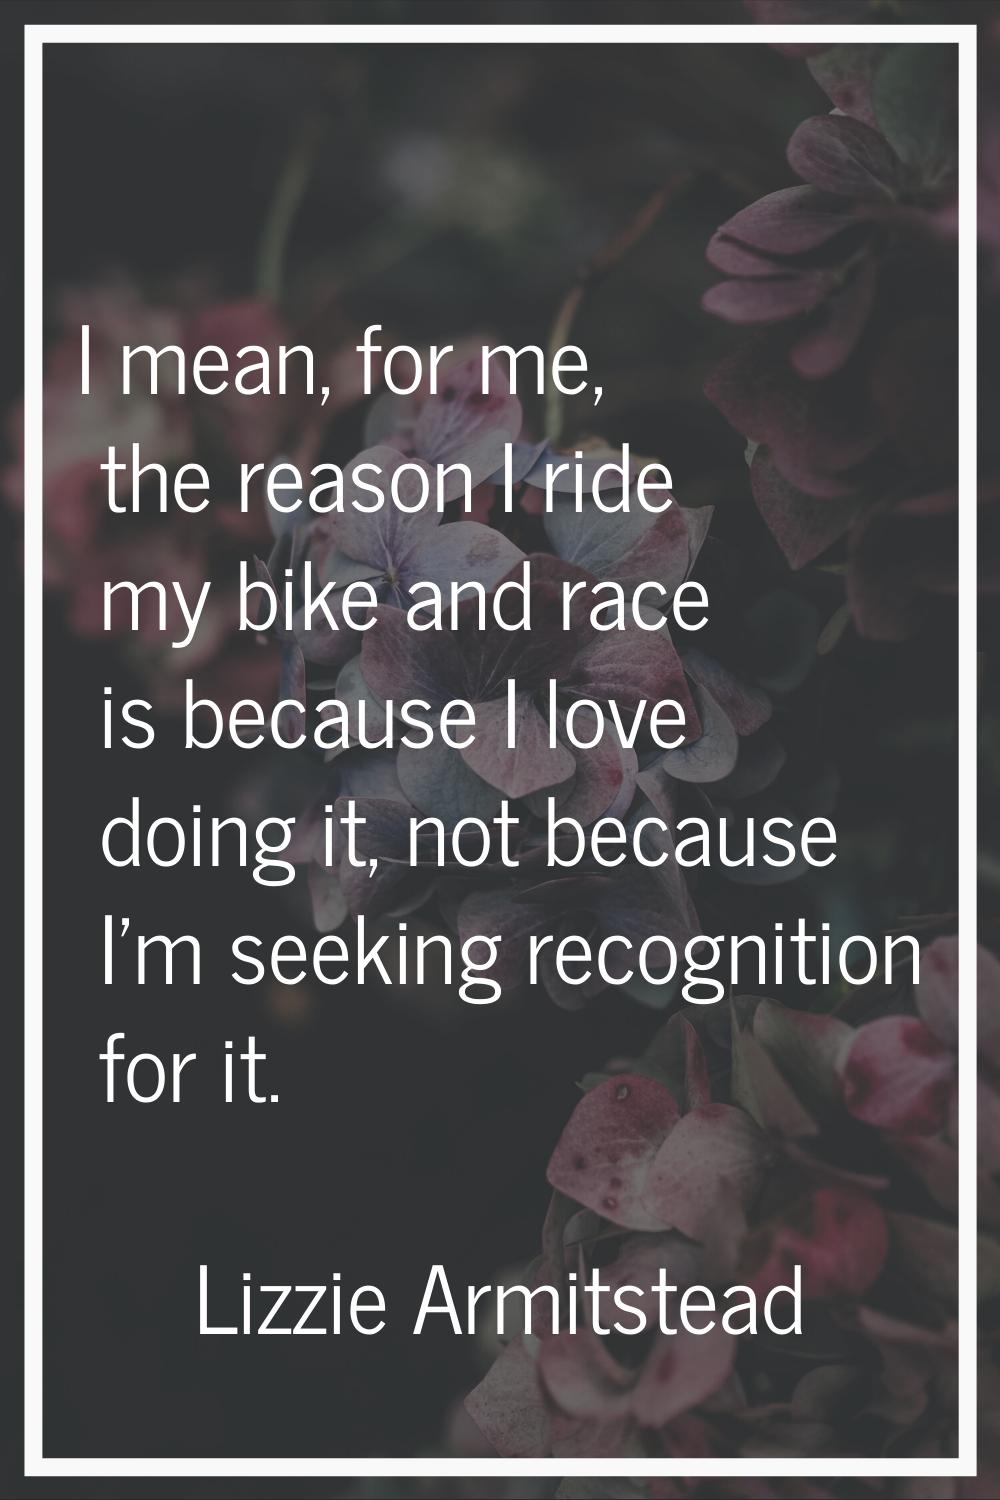 I mean, for me, the reason I ride my bike and race is because I love doing it, not because I'm seek